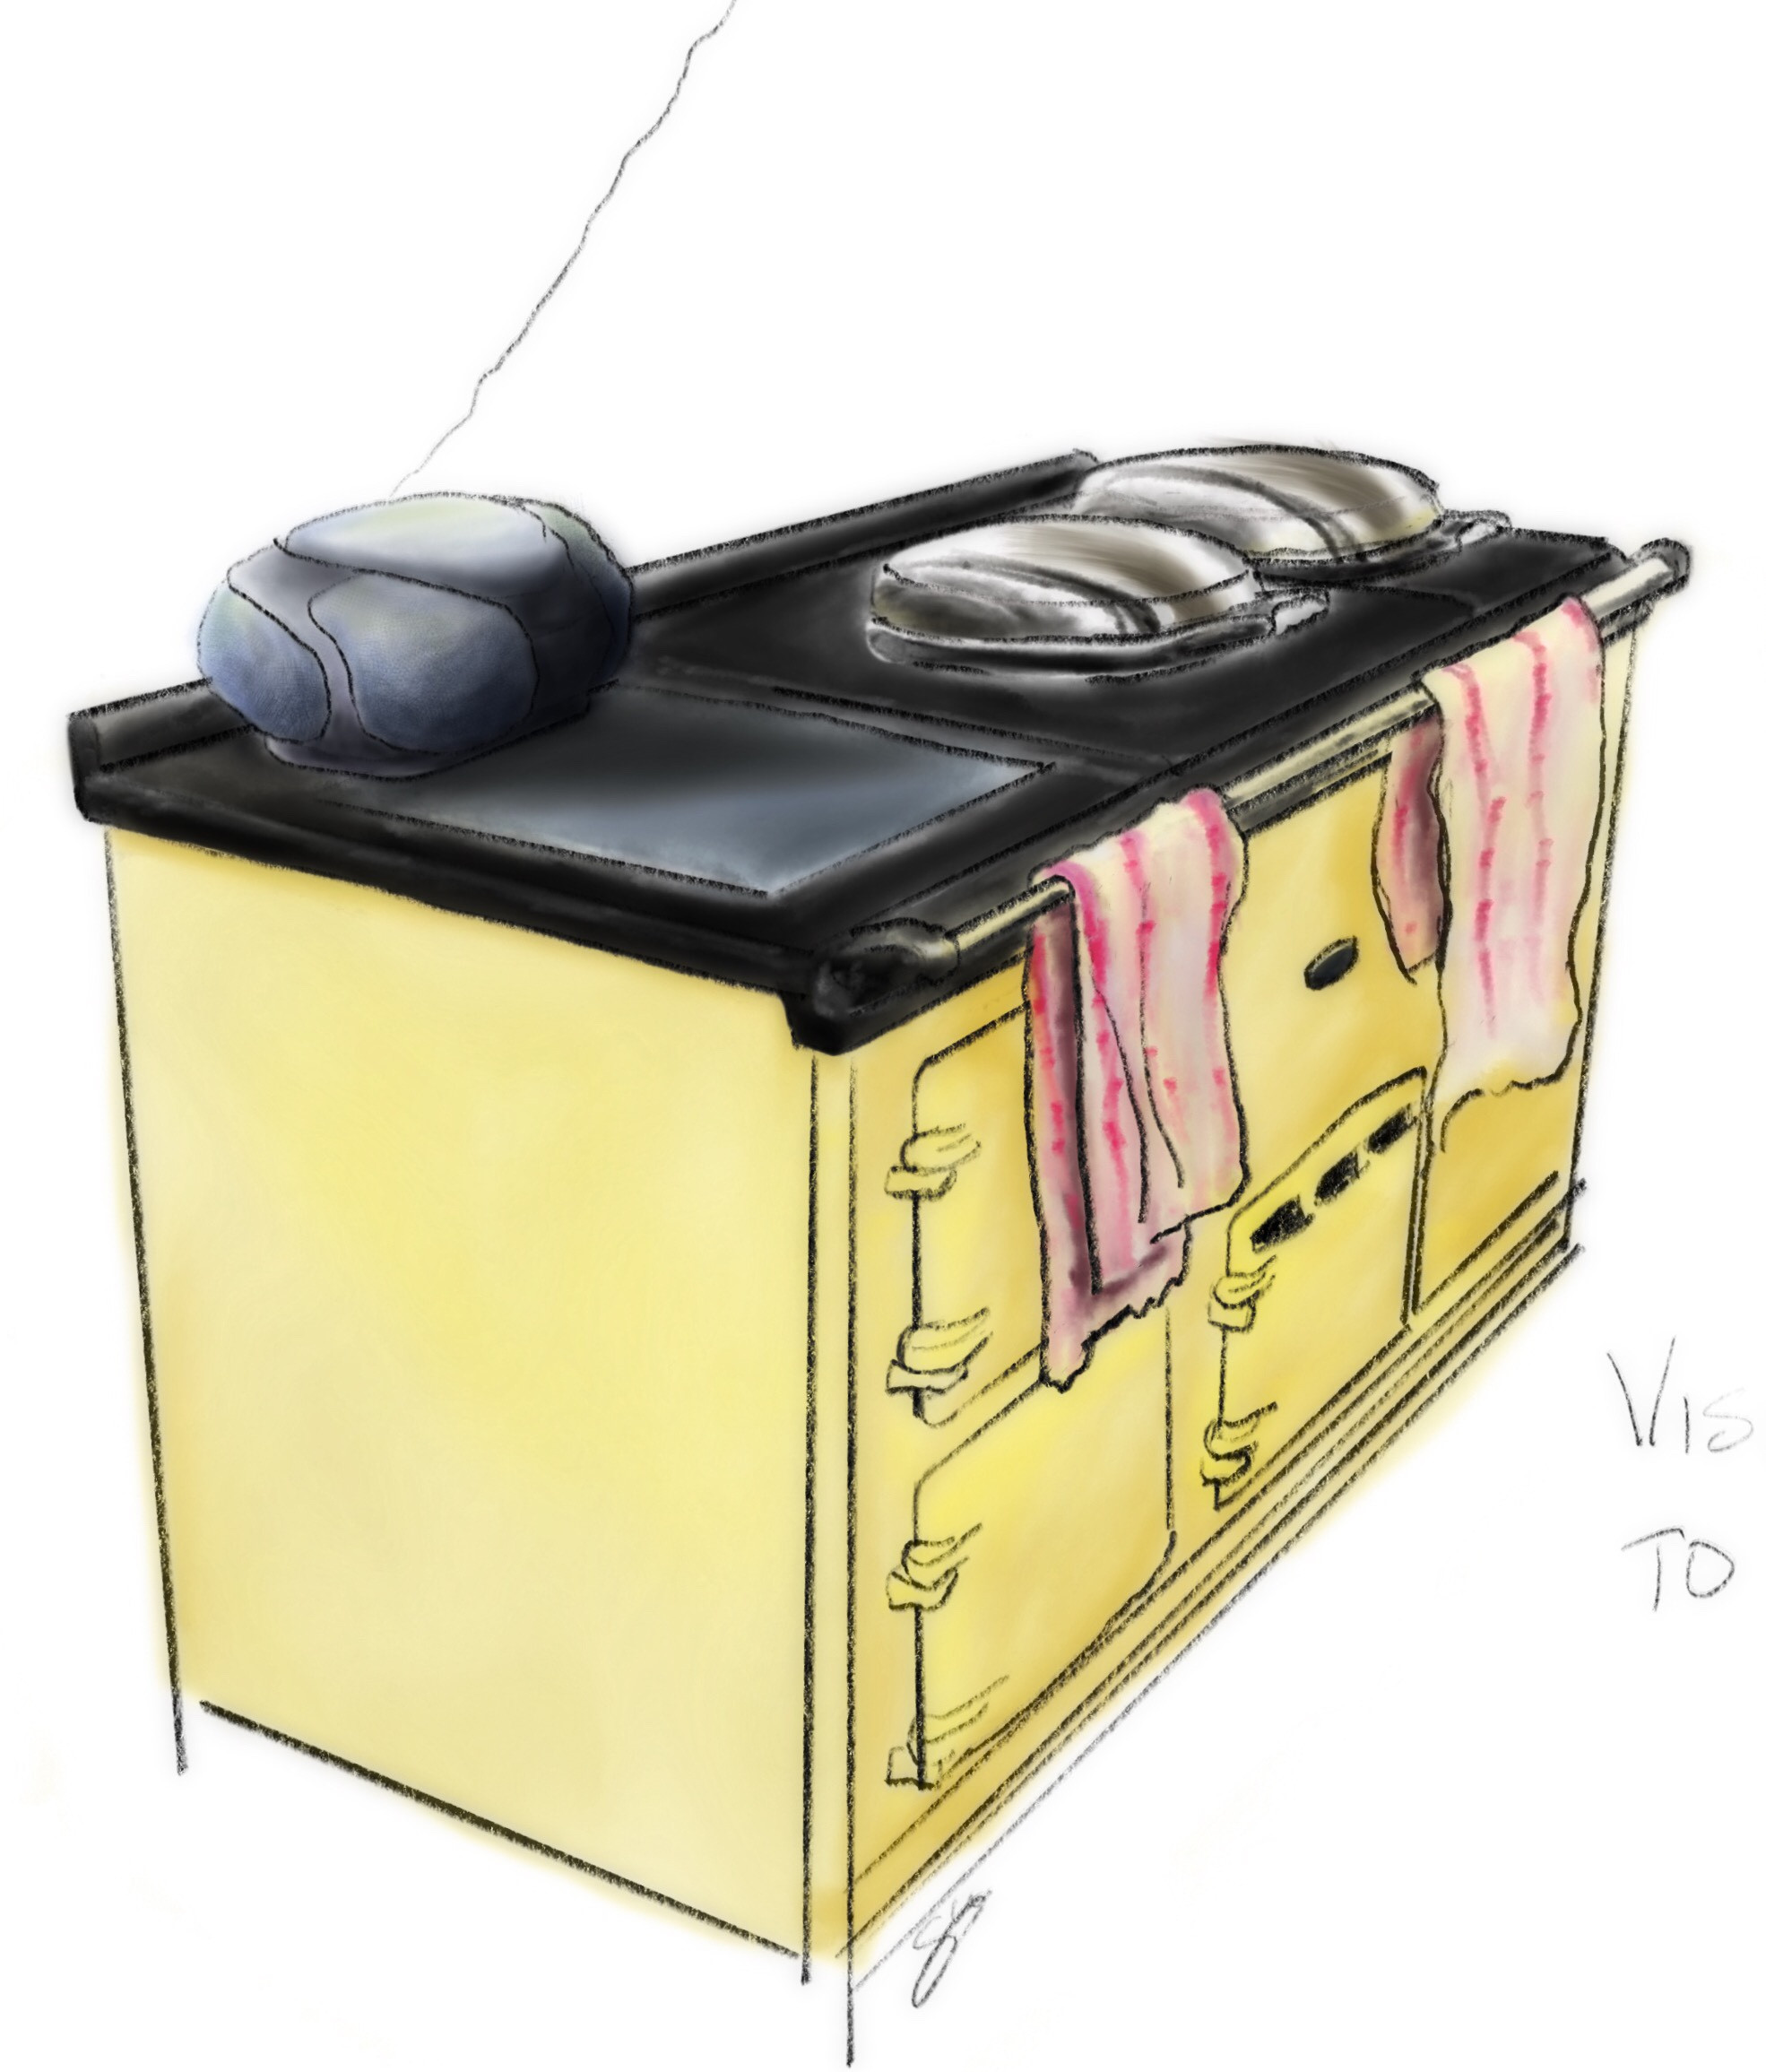 Sketch of an Aga with radio on top - Procreate